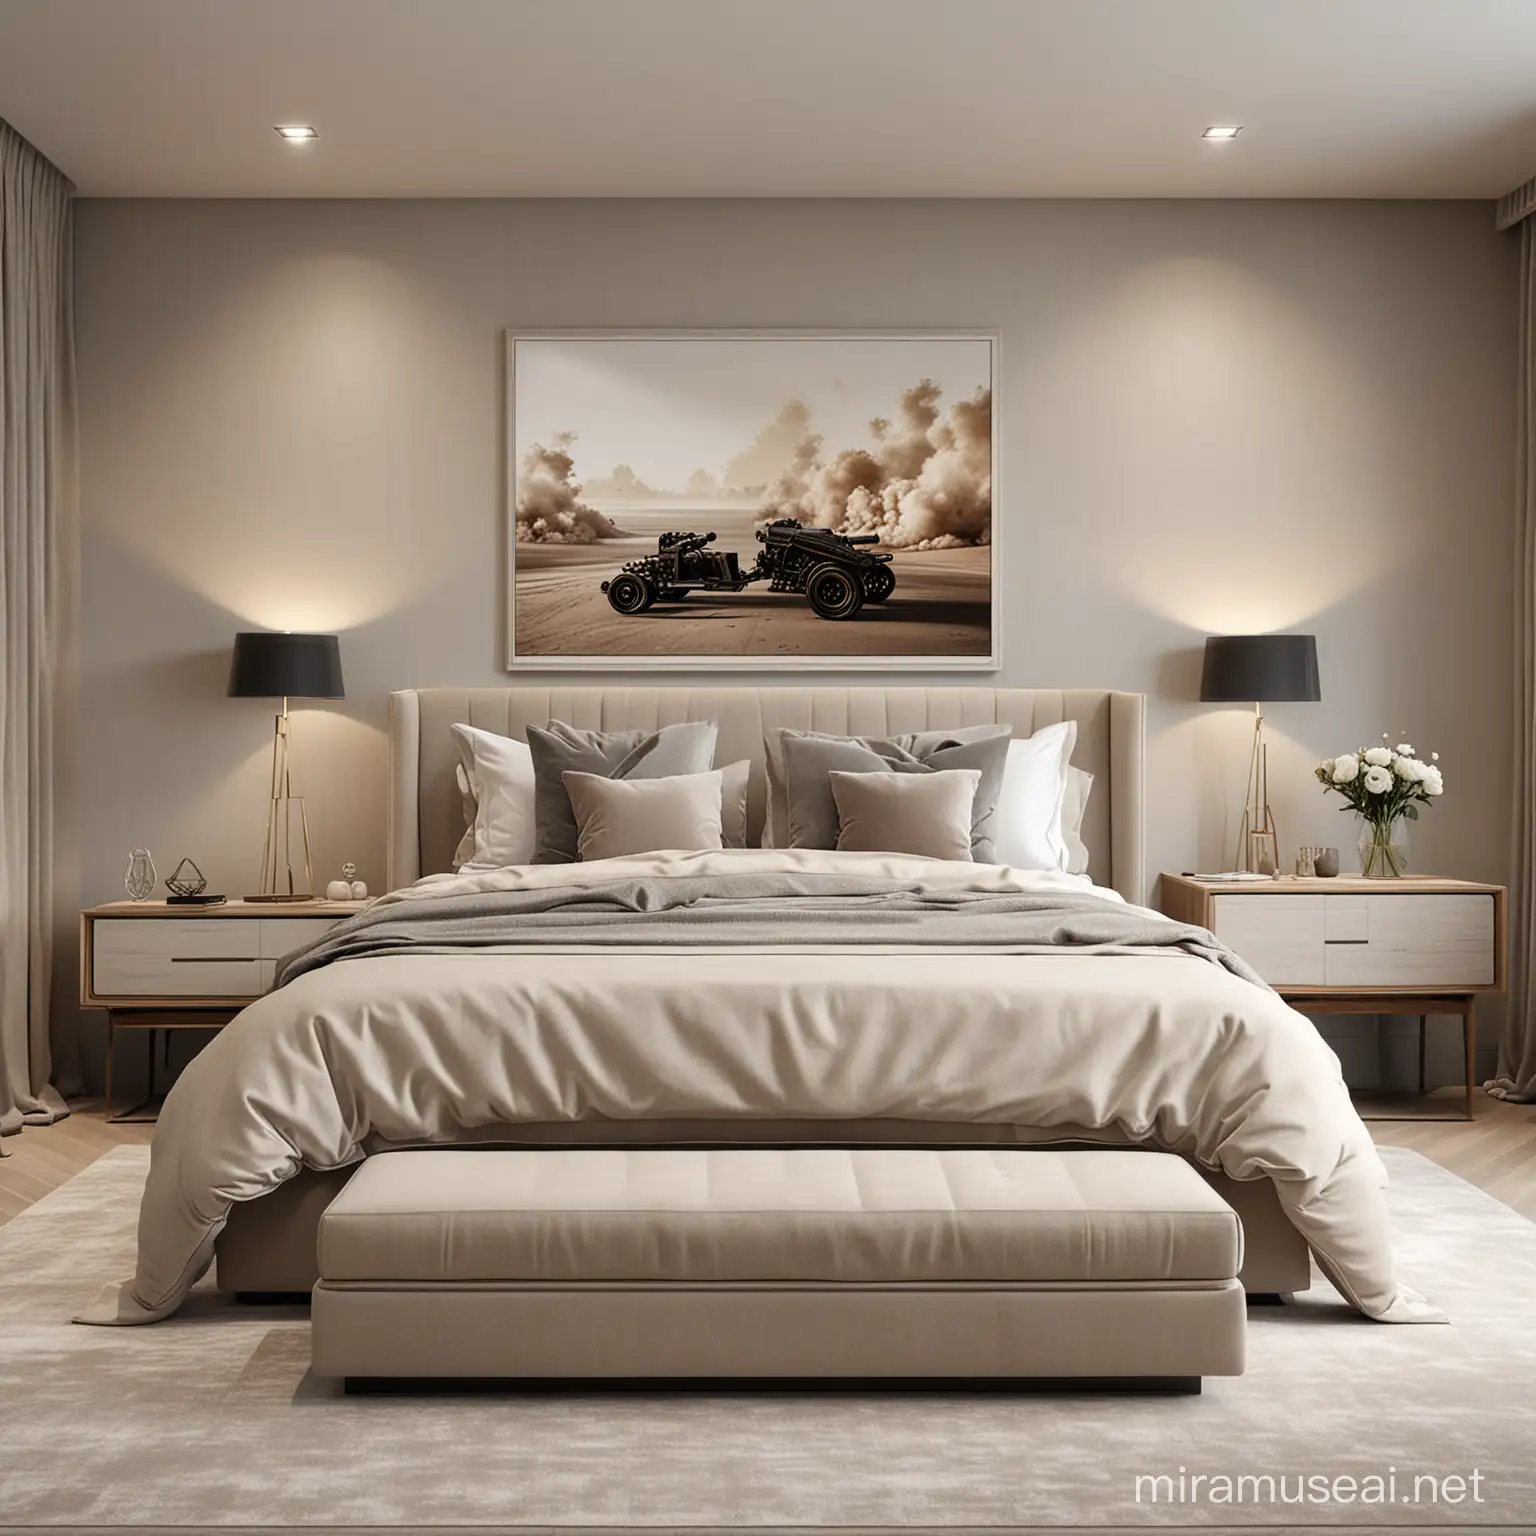 Large luxury modern bedroom in neutral colours, with seating area and modern contemporary artwork on the walls. Realistic Cannon 8k quality.